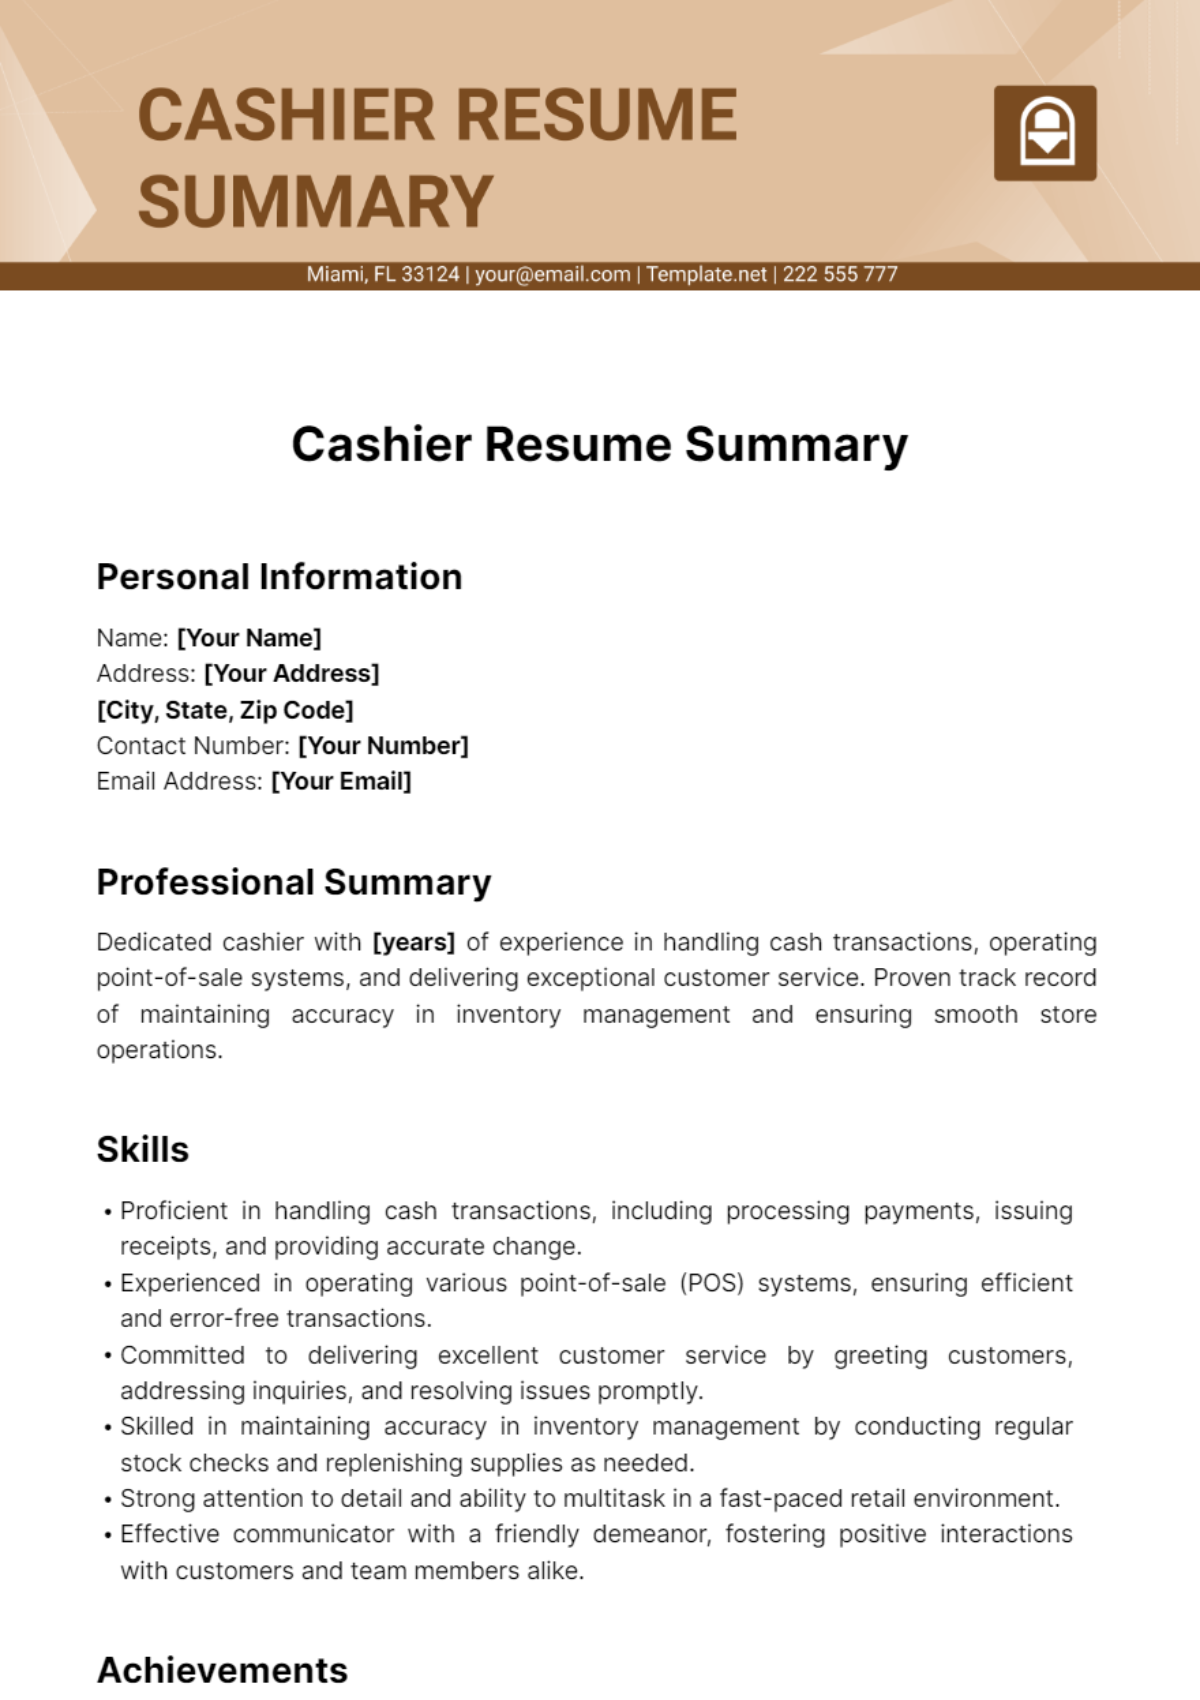 Cashier Resume Summary Template Edit Online And Download Example 5092